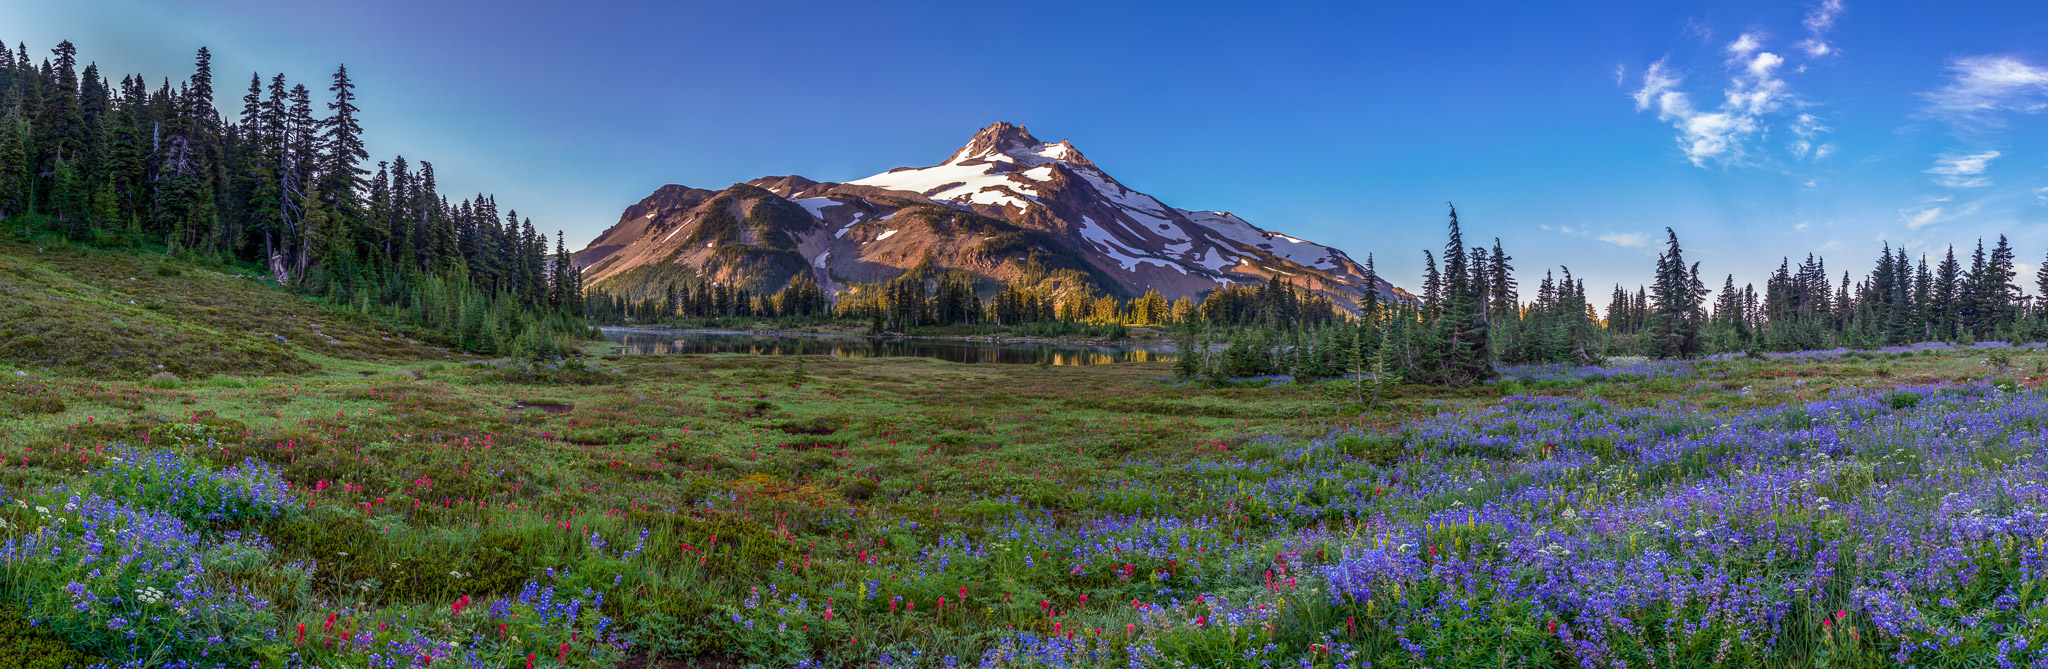 Wildflowers at Russell Lake, Mt. Jefferson Park